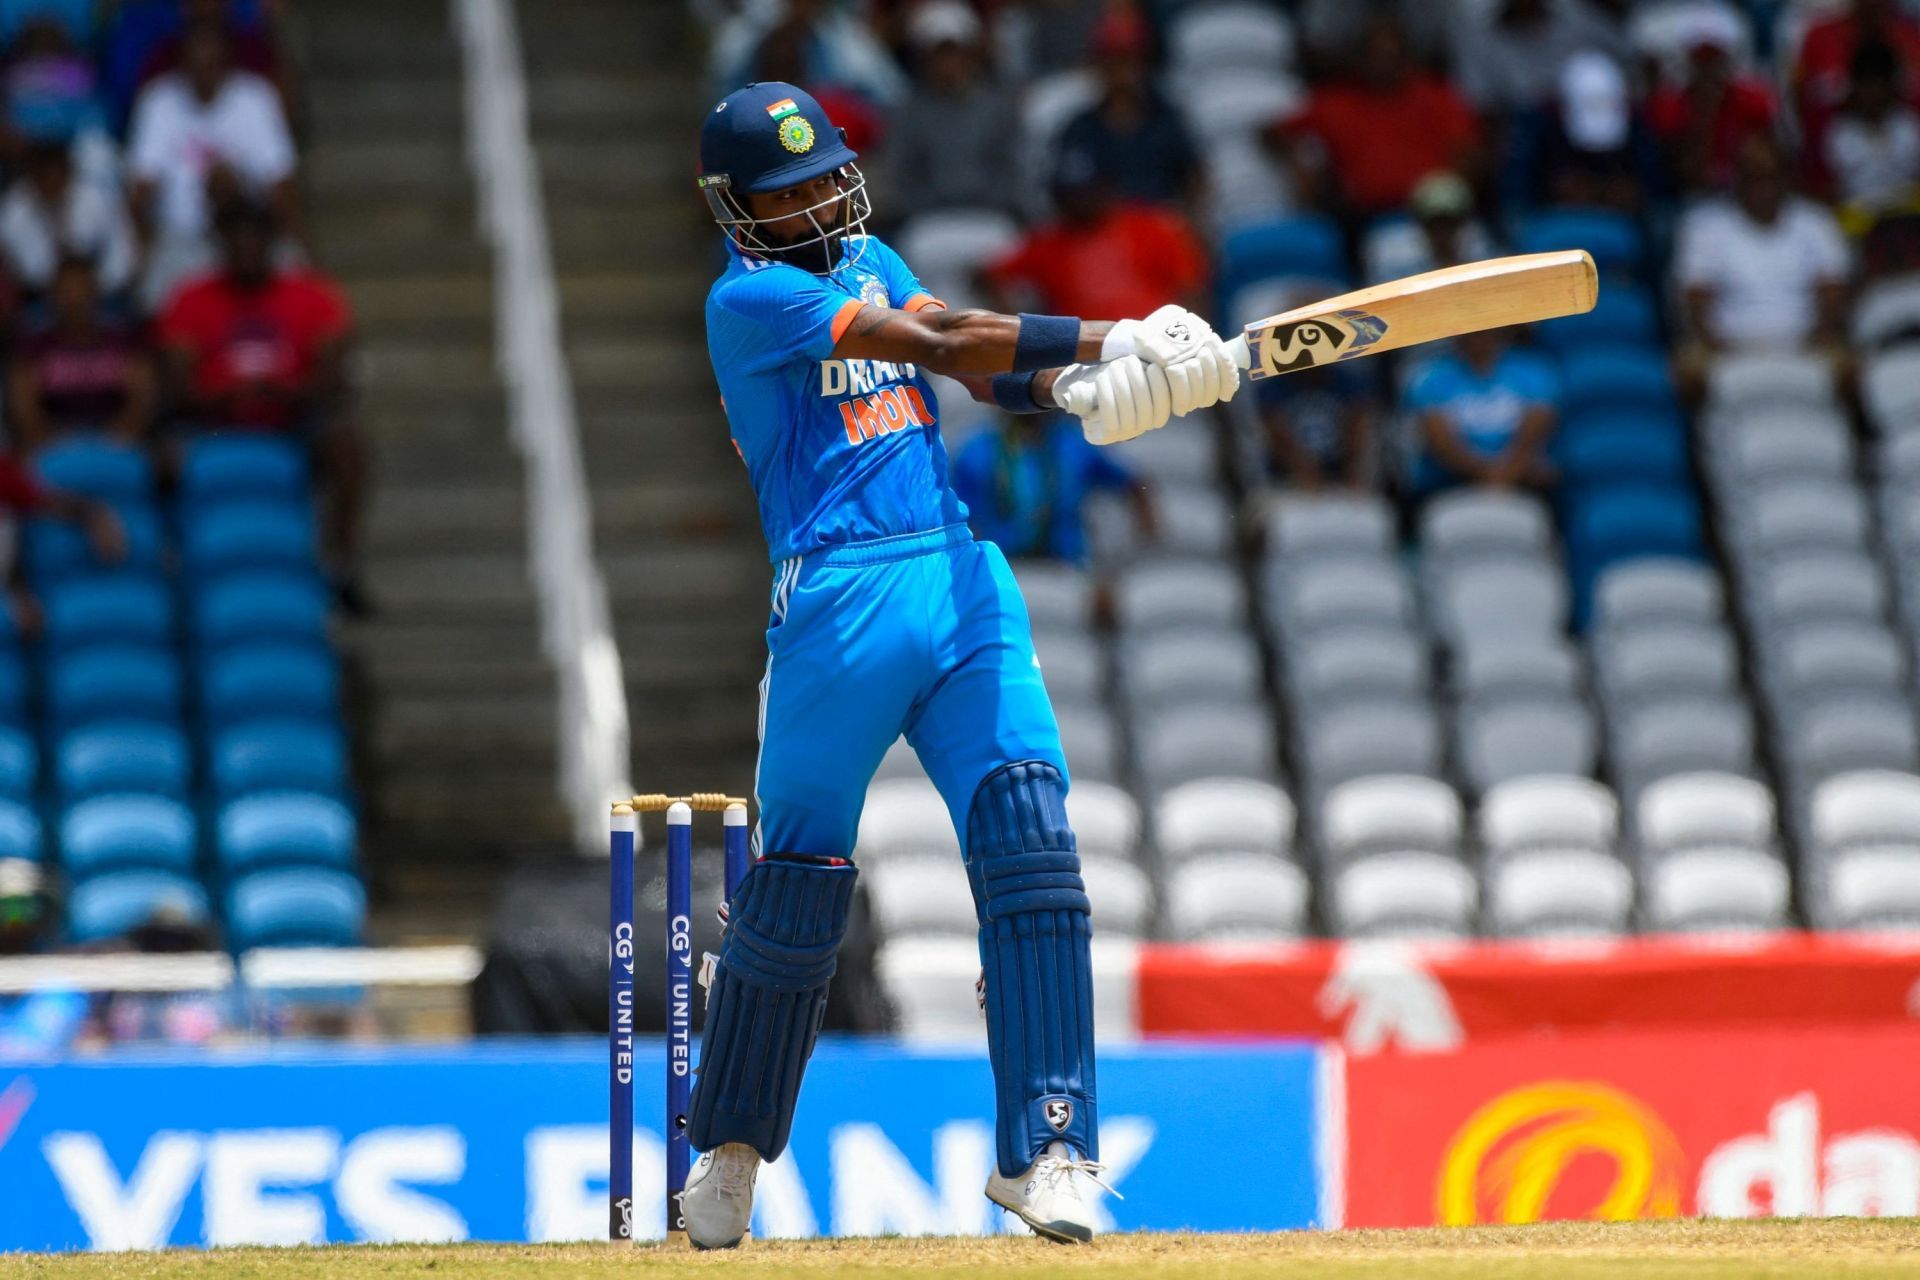 Team India captain Hardik Pandya made a couple of questionable tactical decisions in the second T20I